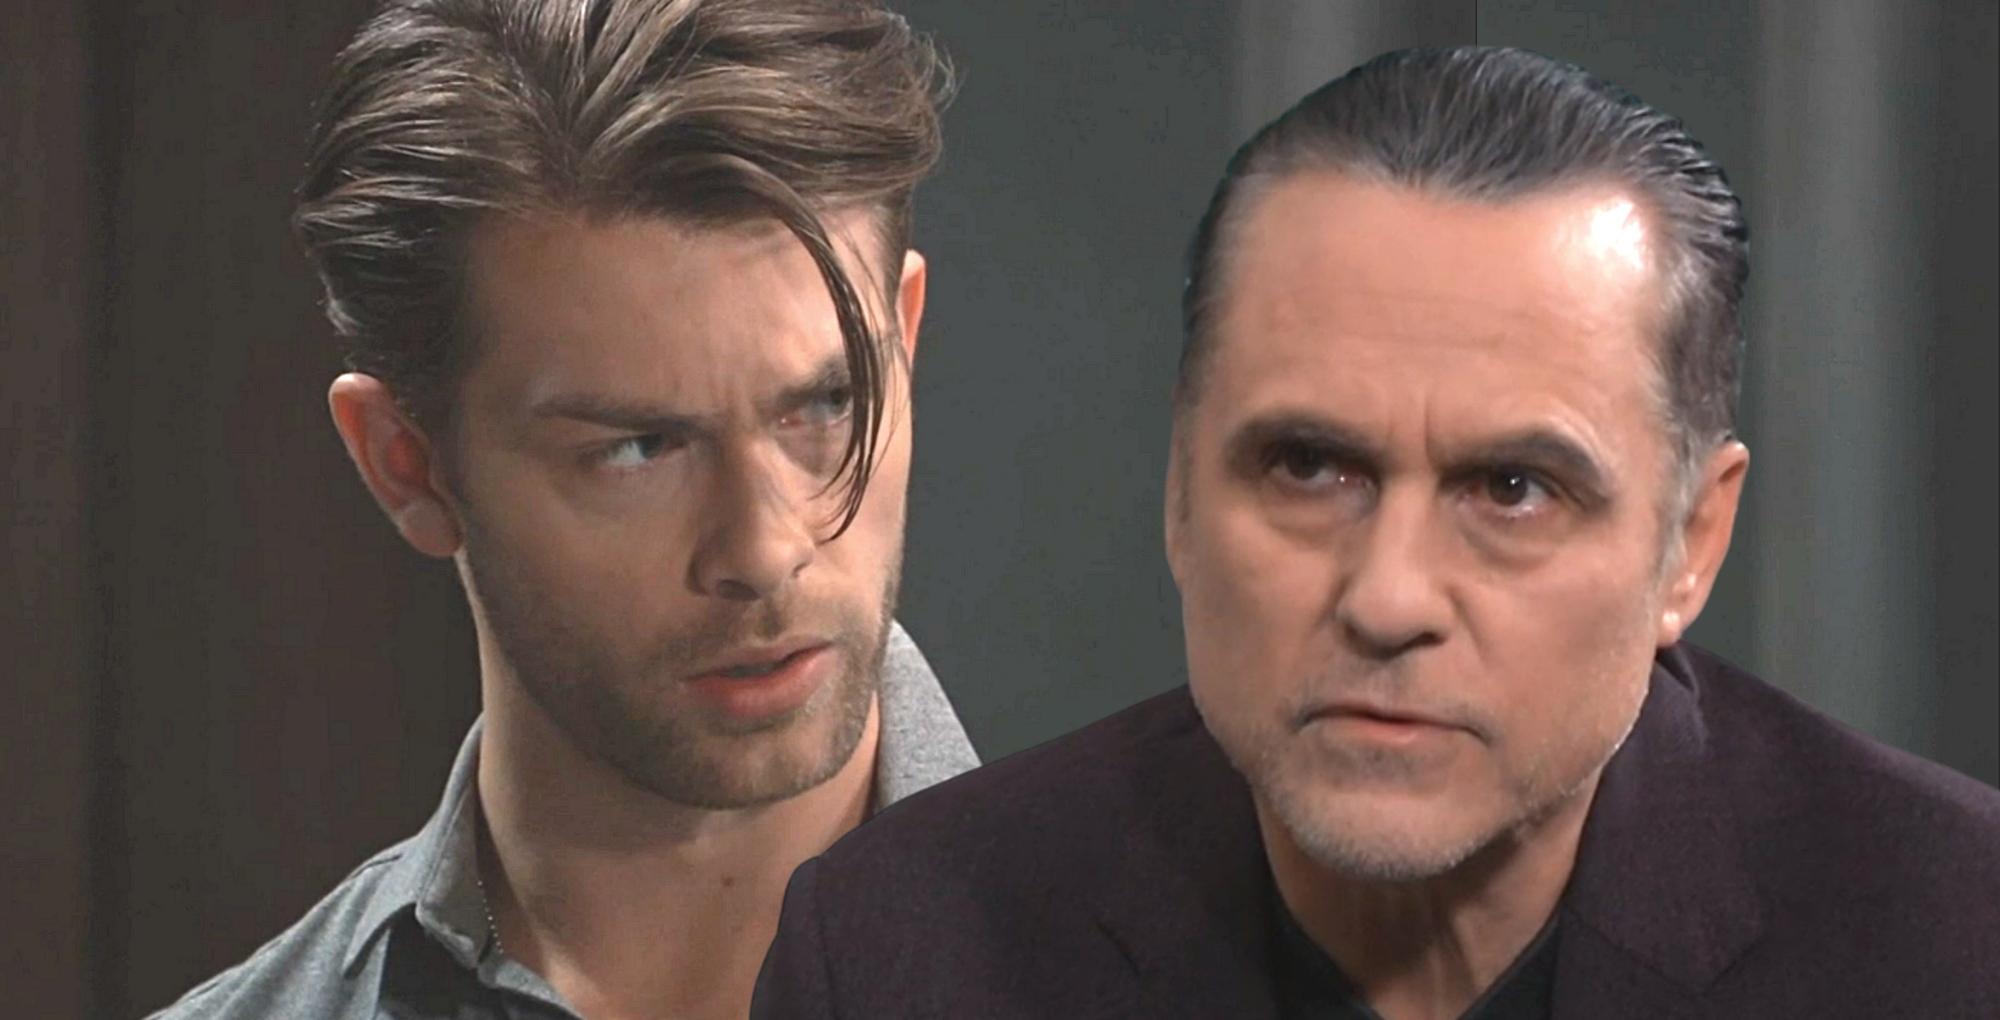 gh spoilers speculation that dex heller switches to team sonny corinthos